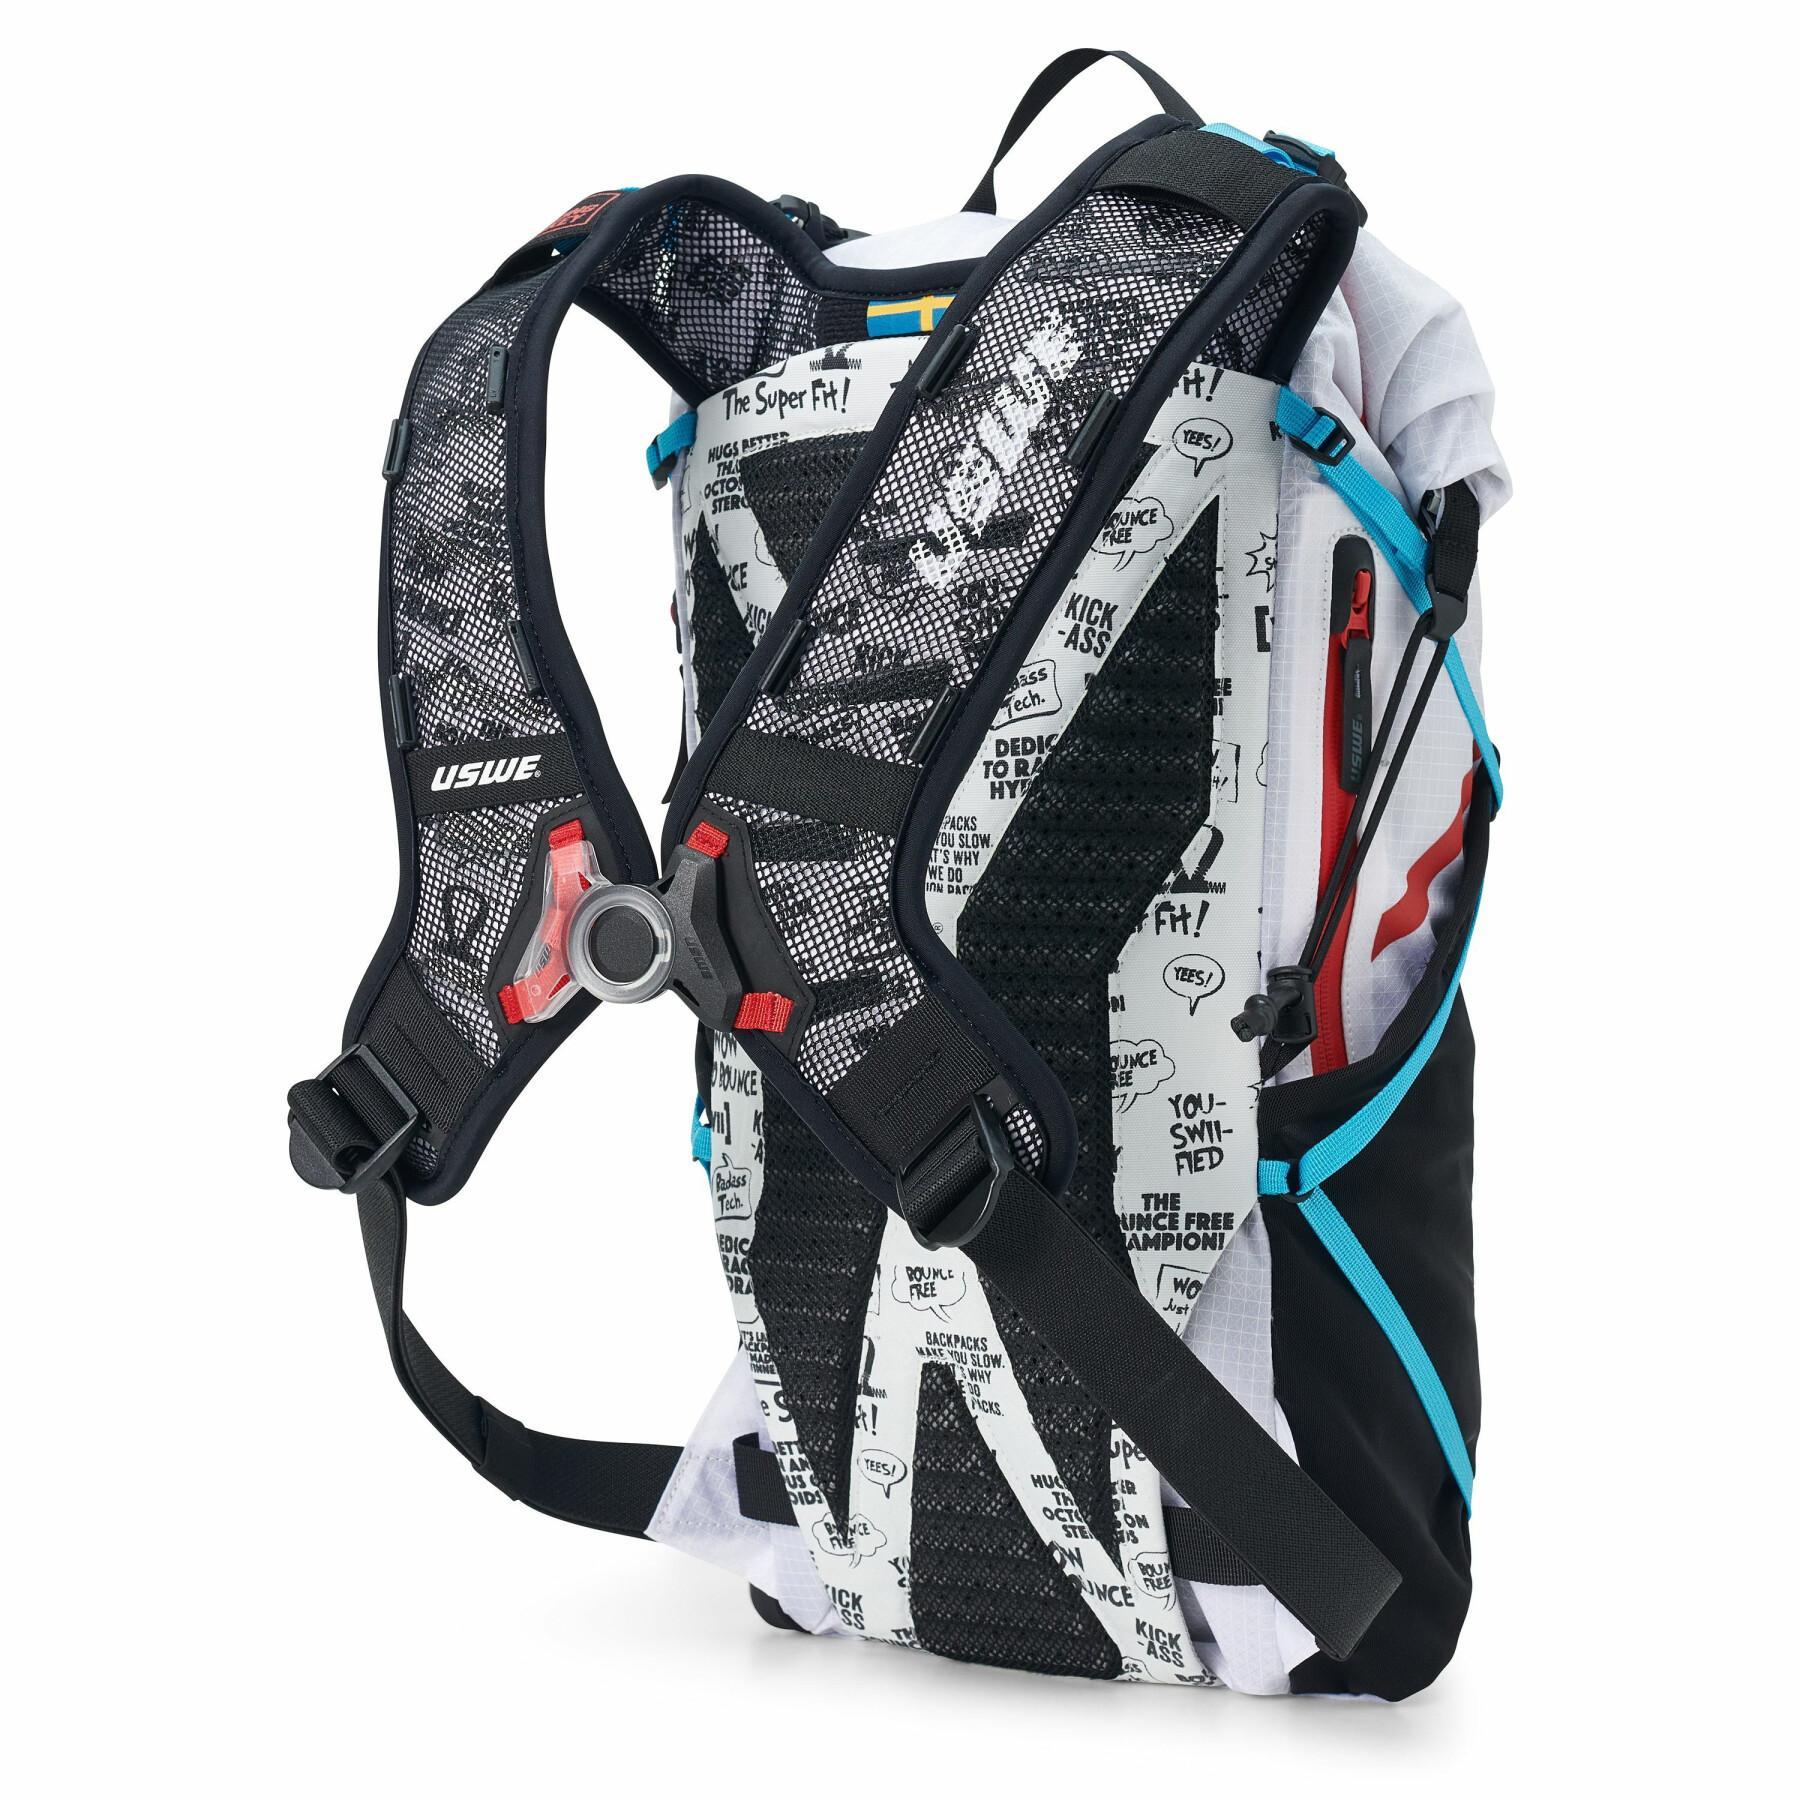 Backpack and hydration Uswe Hajker pro 18 summer 3l ndm 2.1